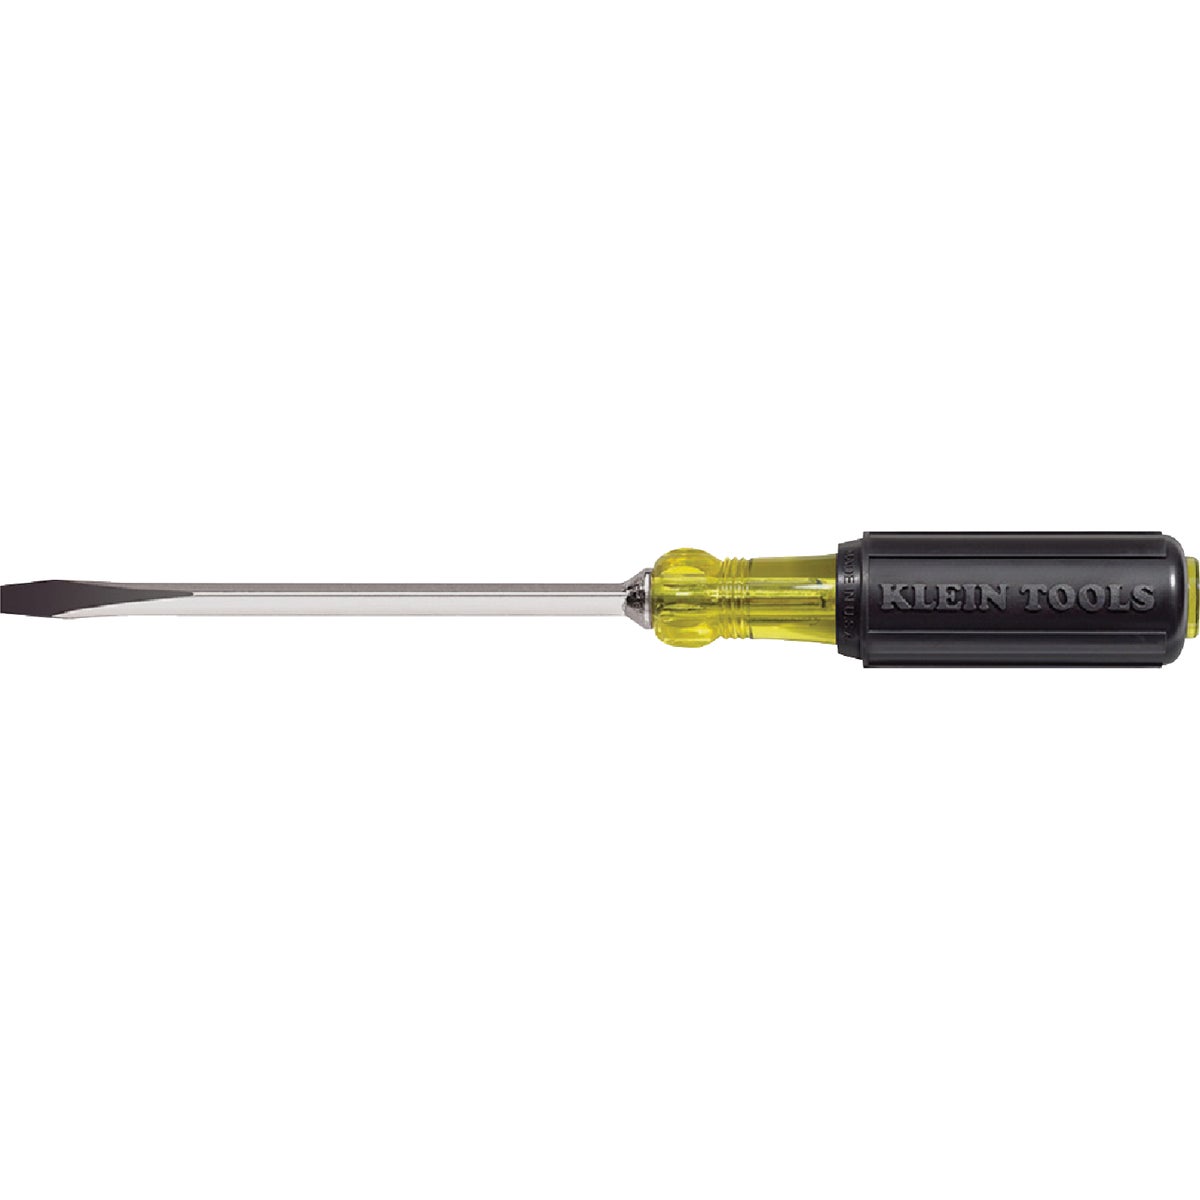 Klein 5/16 In. x 6 In. Square Shank Slotted Screwdriver